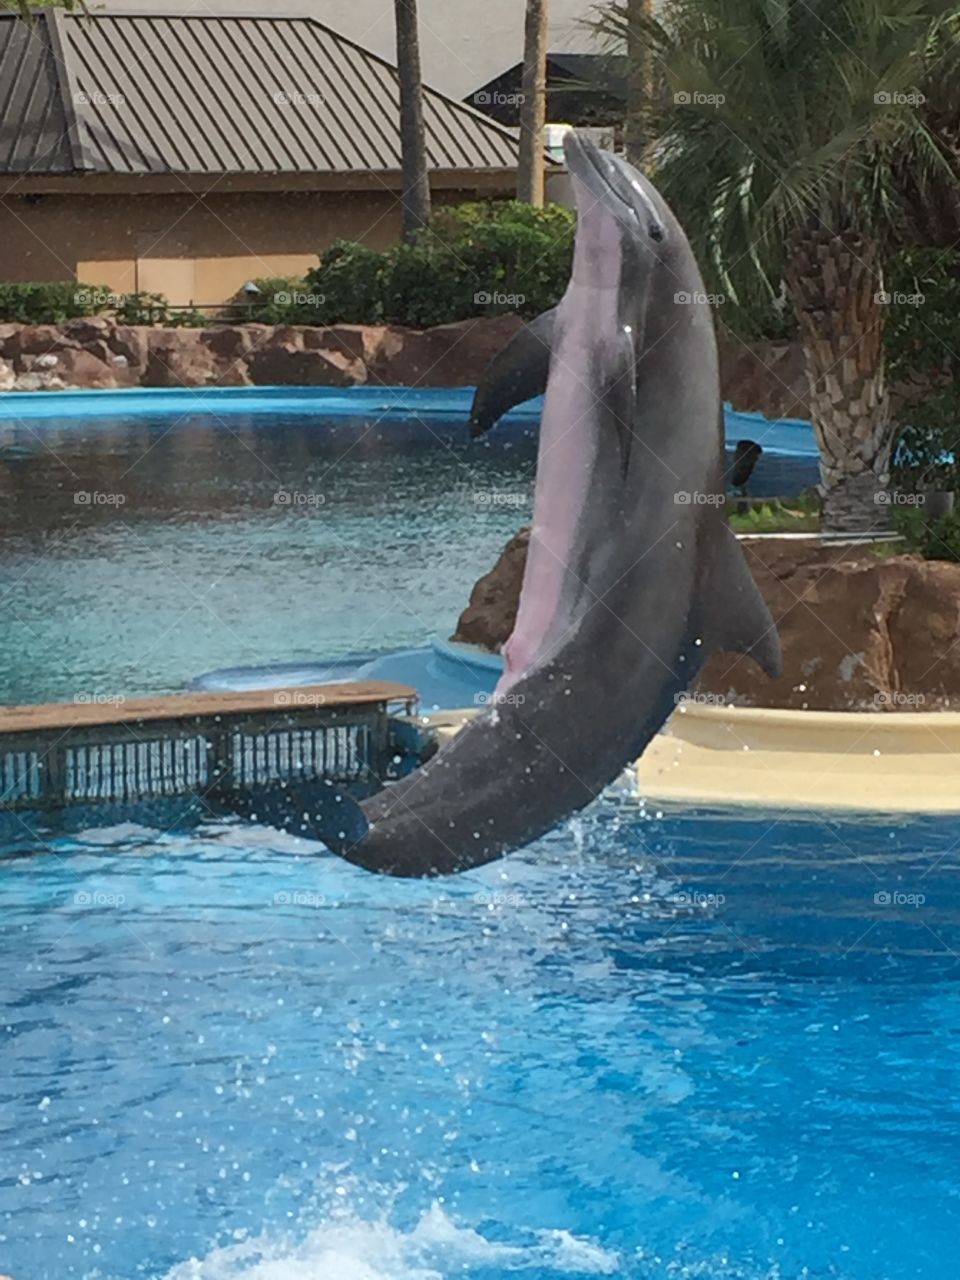 A dolphin goes airborne at the Dolphin Habitat, The Mirage in Las Vegas. 